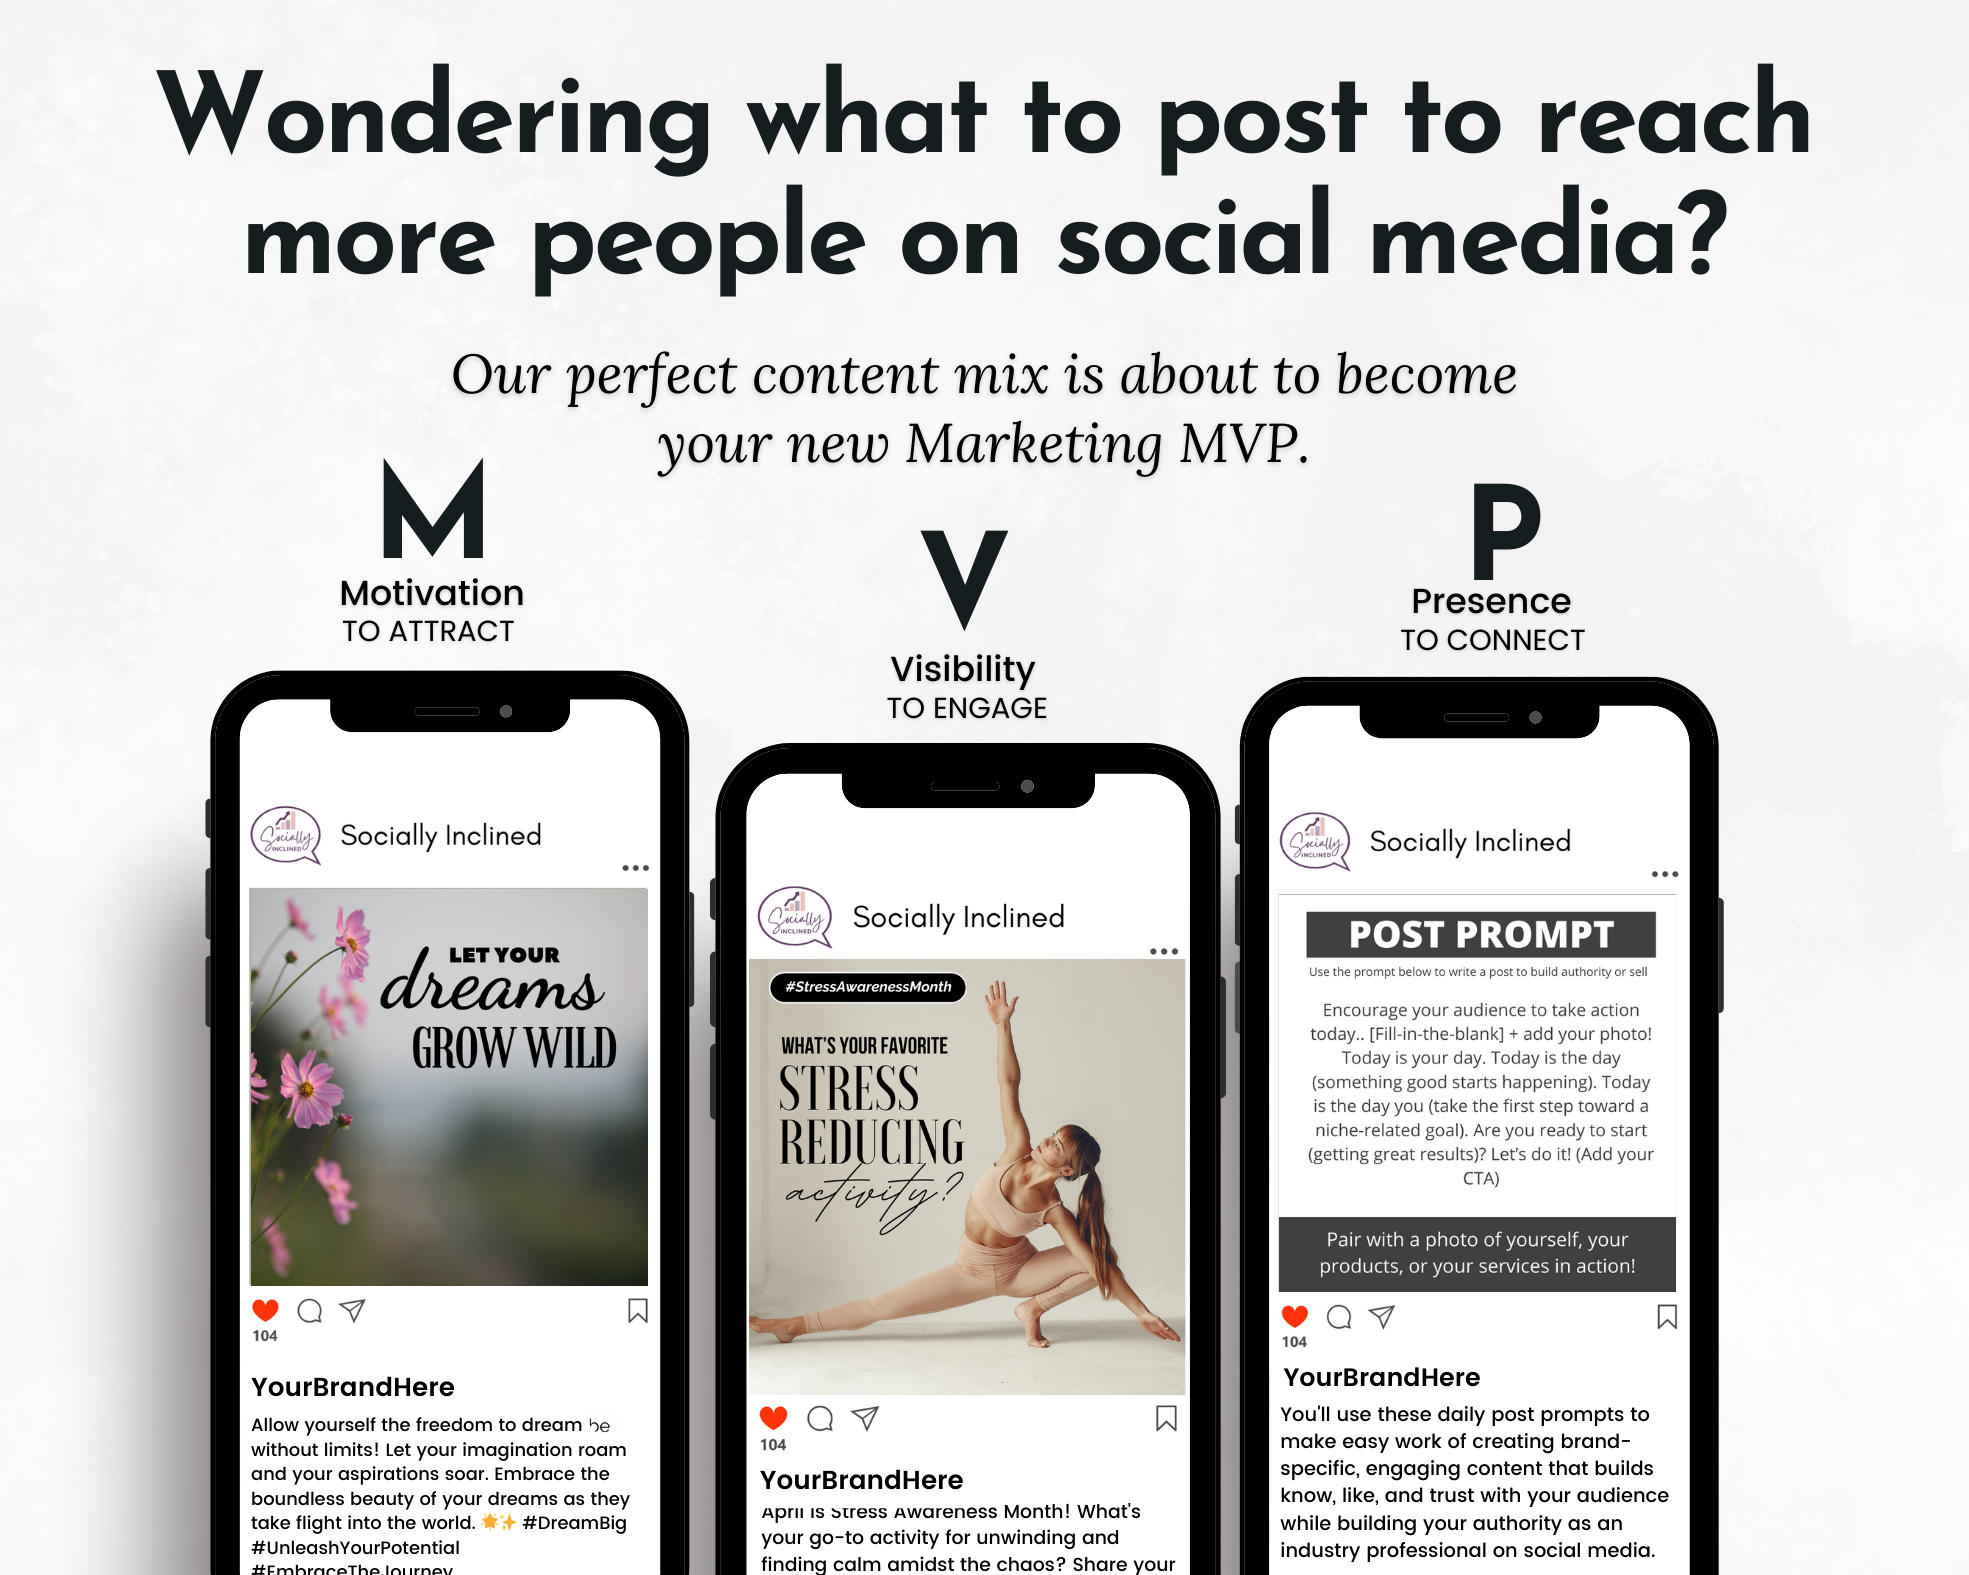 Marketing strategy graphic with April Daily Posting Plan - Your Social Plan mobile phones displaying social media growth content and acronyms MVP for attraction, visibility, and social media presence from Get Socially Inclined.